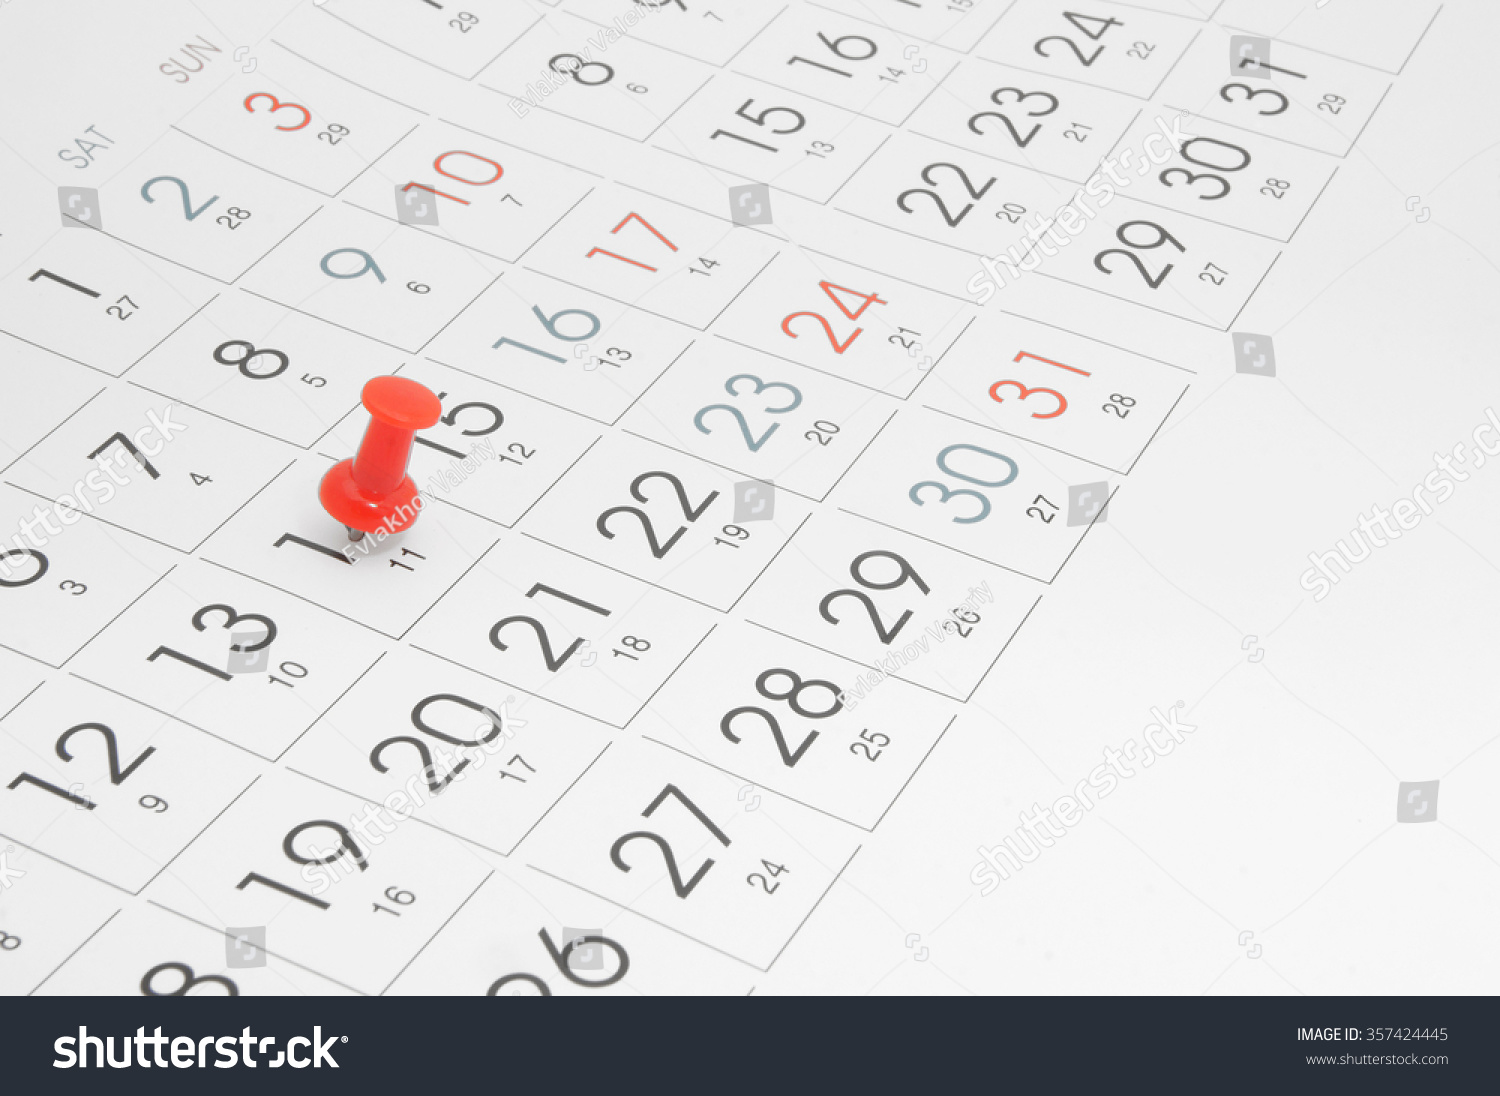 Calendar Page With Push Pin Planning Concept Stock Photo 357424445